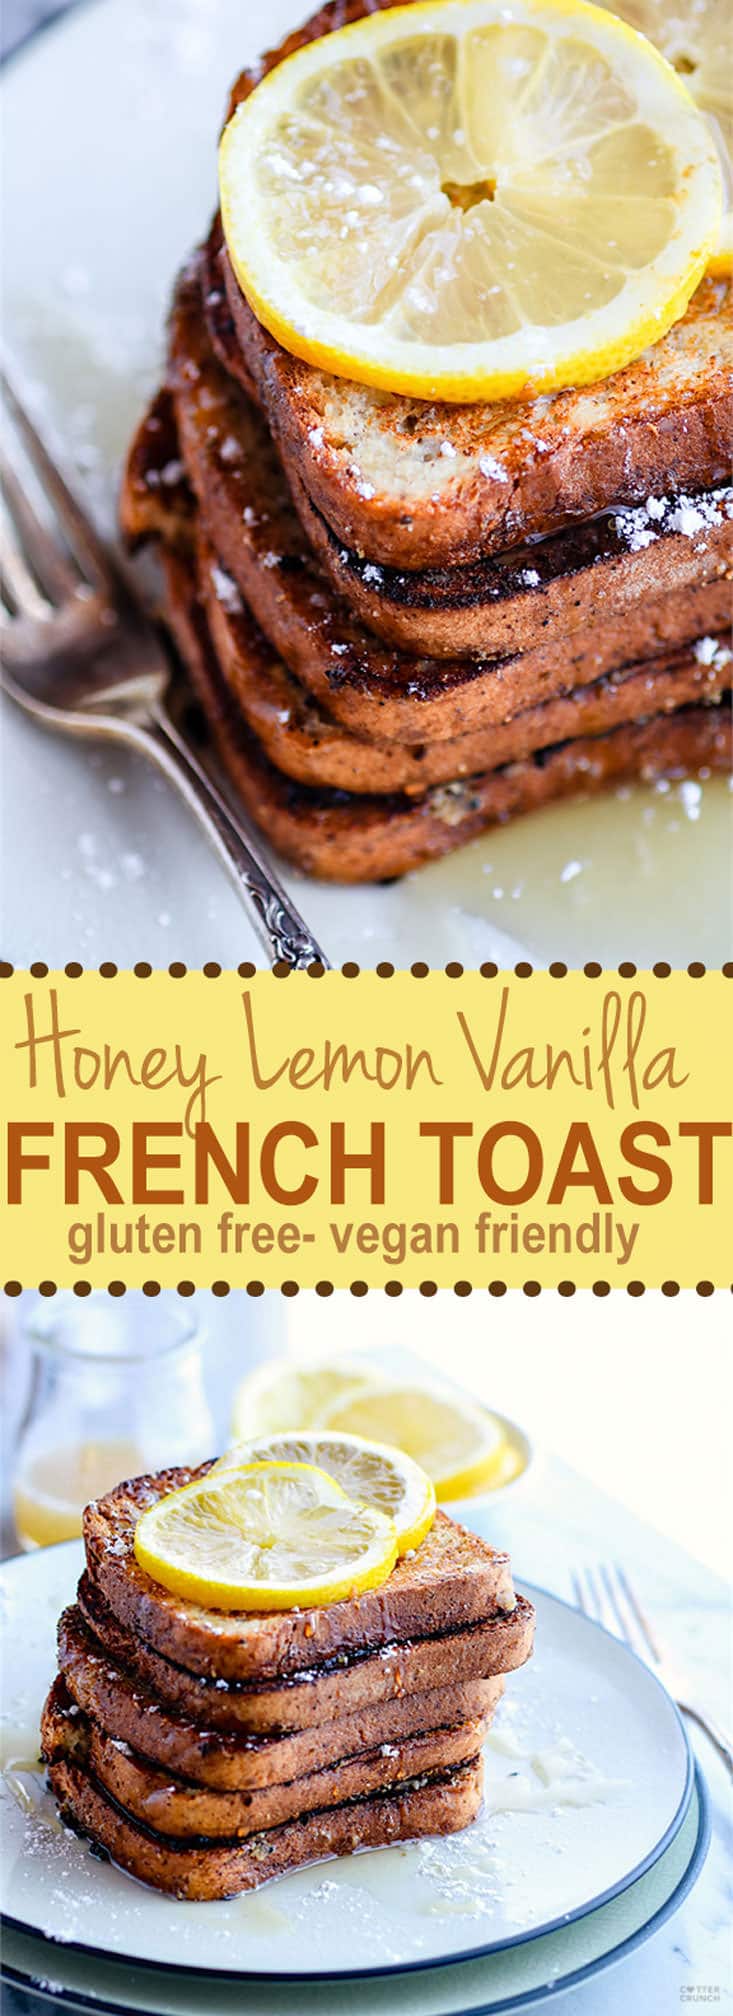 Honey Lemon Vanilla Gluten Free French Toast. Simple yet delicious flavors, easy to make, no eggs needed, and vegan Friendly! This Gluten Free French Toast breakfast is a hit for weekend brunch or for kids. Perfect for freezing and making ahead too. But don't forget the sauce.. that honey lemon cream sauce! #gfsquad